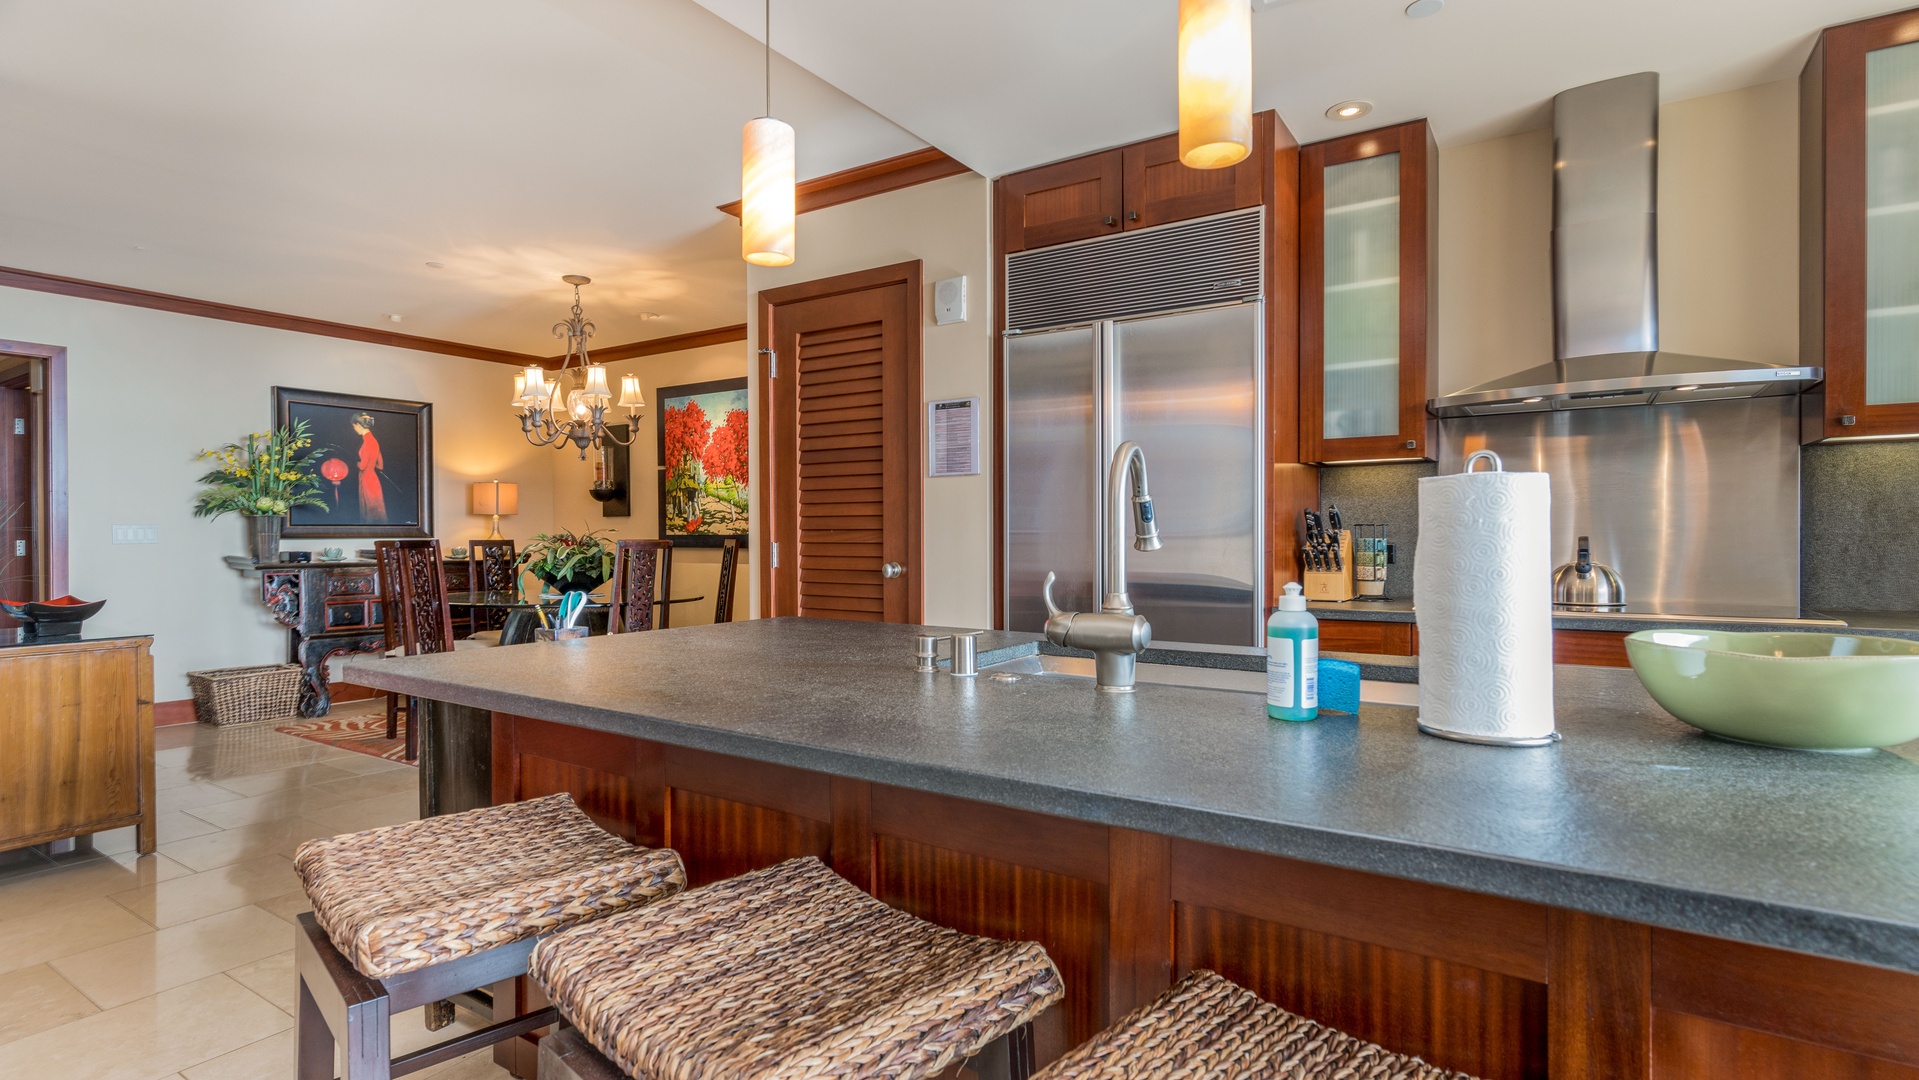 Kapolei Vacation Rentals, Ko Olina Beach Villas O905 - The open floor plan is inviting and easy for conversation.